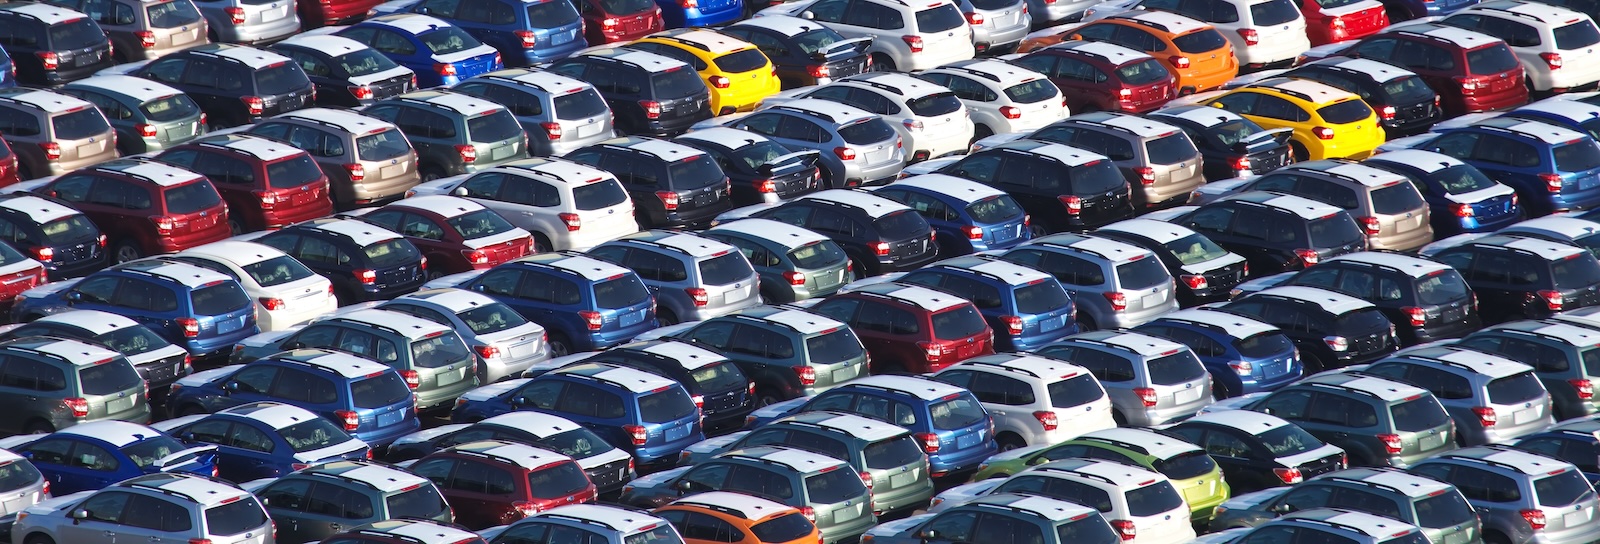 An aerial view of a car dealership's inventory lot filled with rows of various cars, illustrating effective car dealership inventory management strategies. This image highlights the importance of organized automotive dealership inventory management for optimal sales and customer satisfaction.